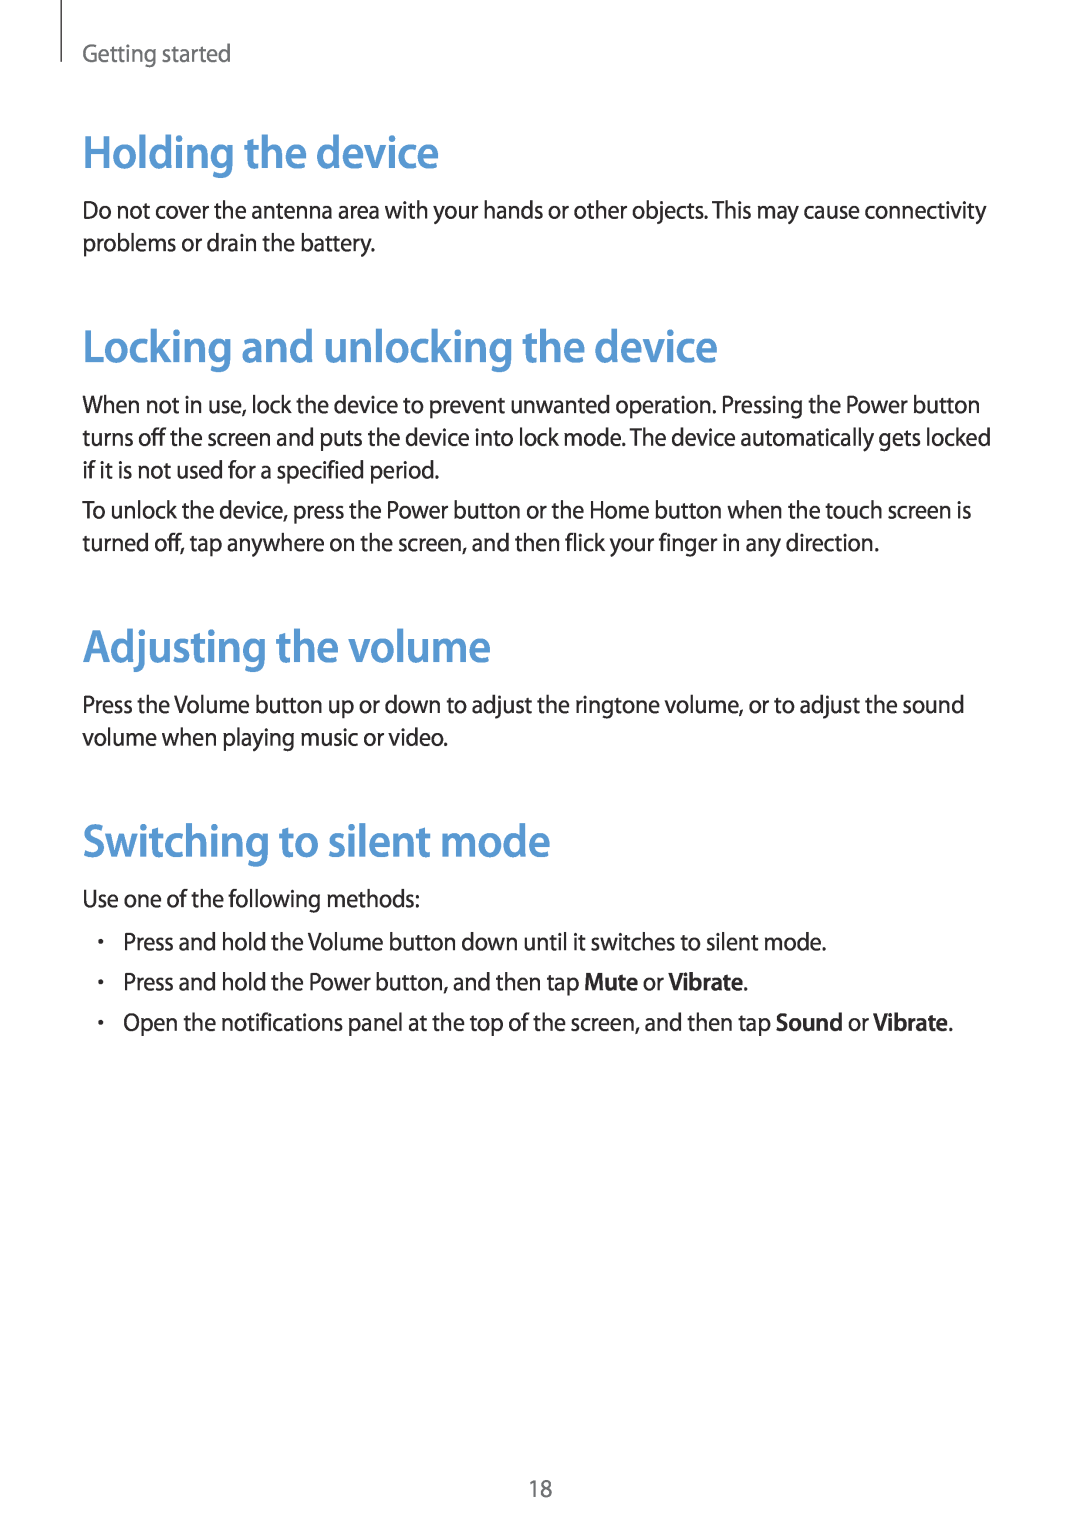 Samsung GT-I9195ZWIATO manual Holding the device, Locking and unlocking the device, Adjusting the volume, Getting started 